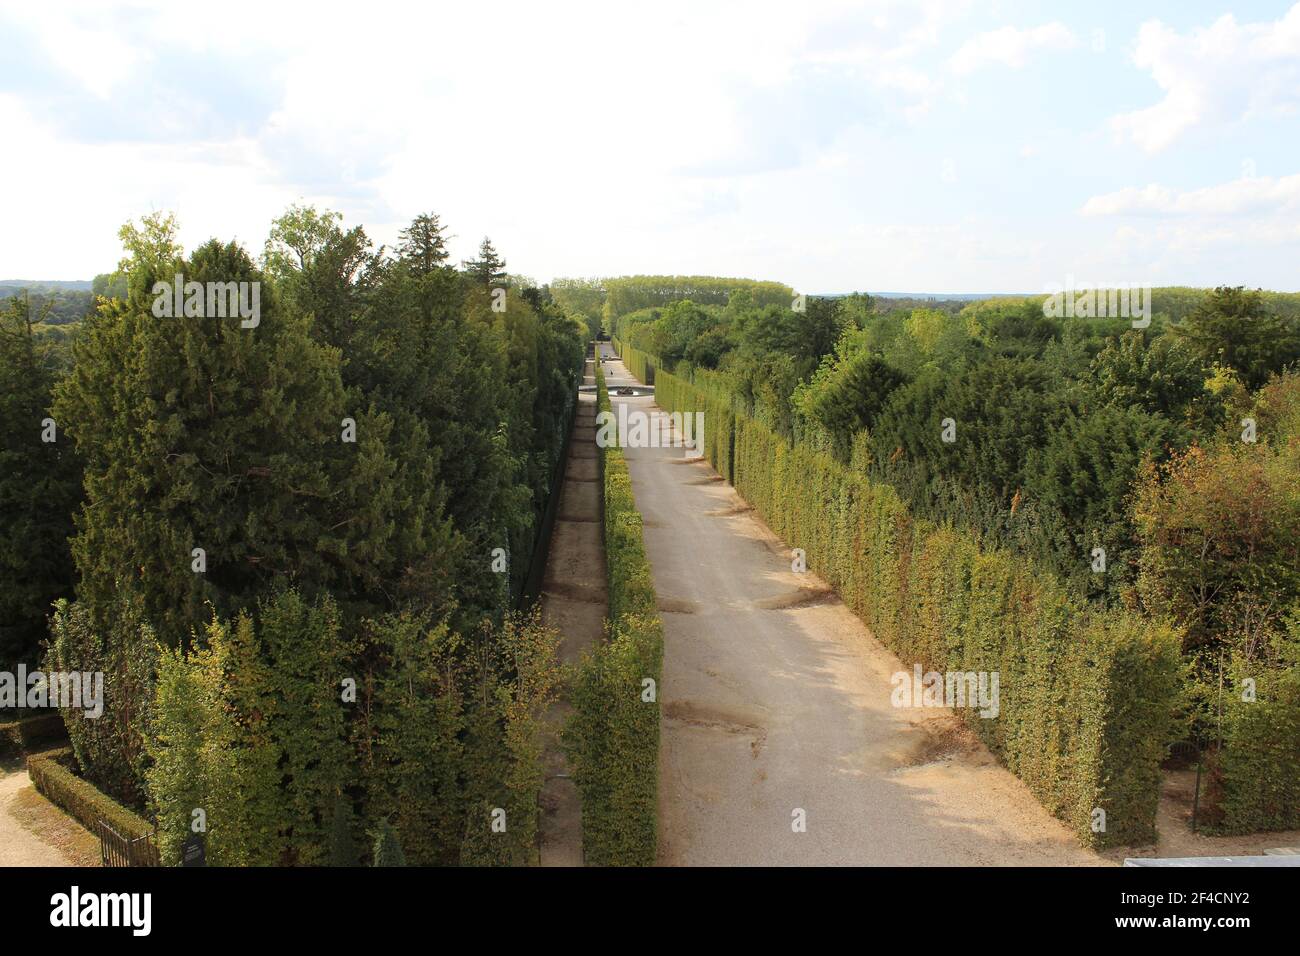 garden with dirt road, surrounded by bushes and trees Stock Photo